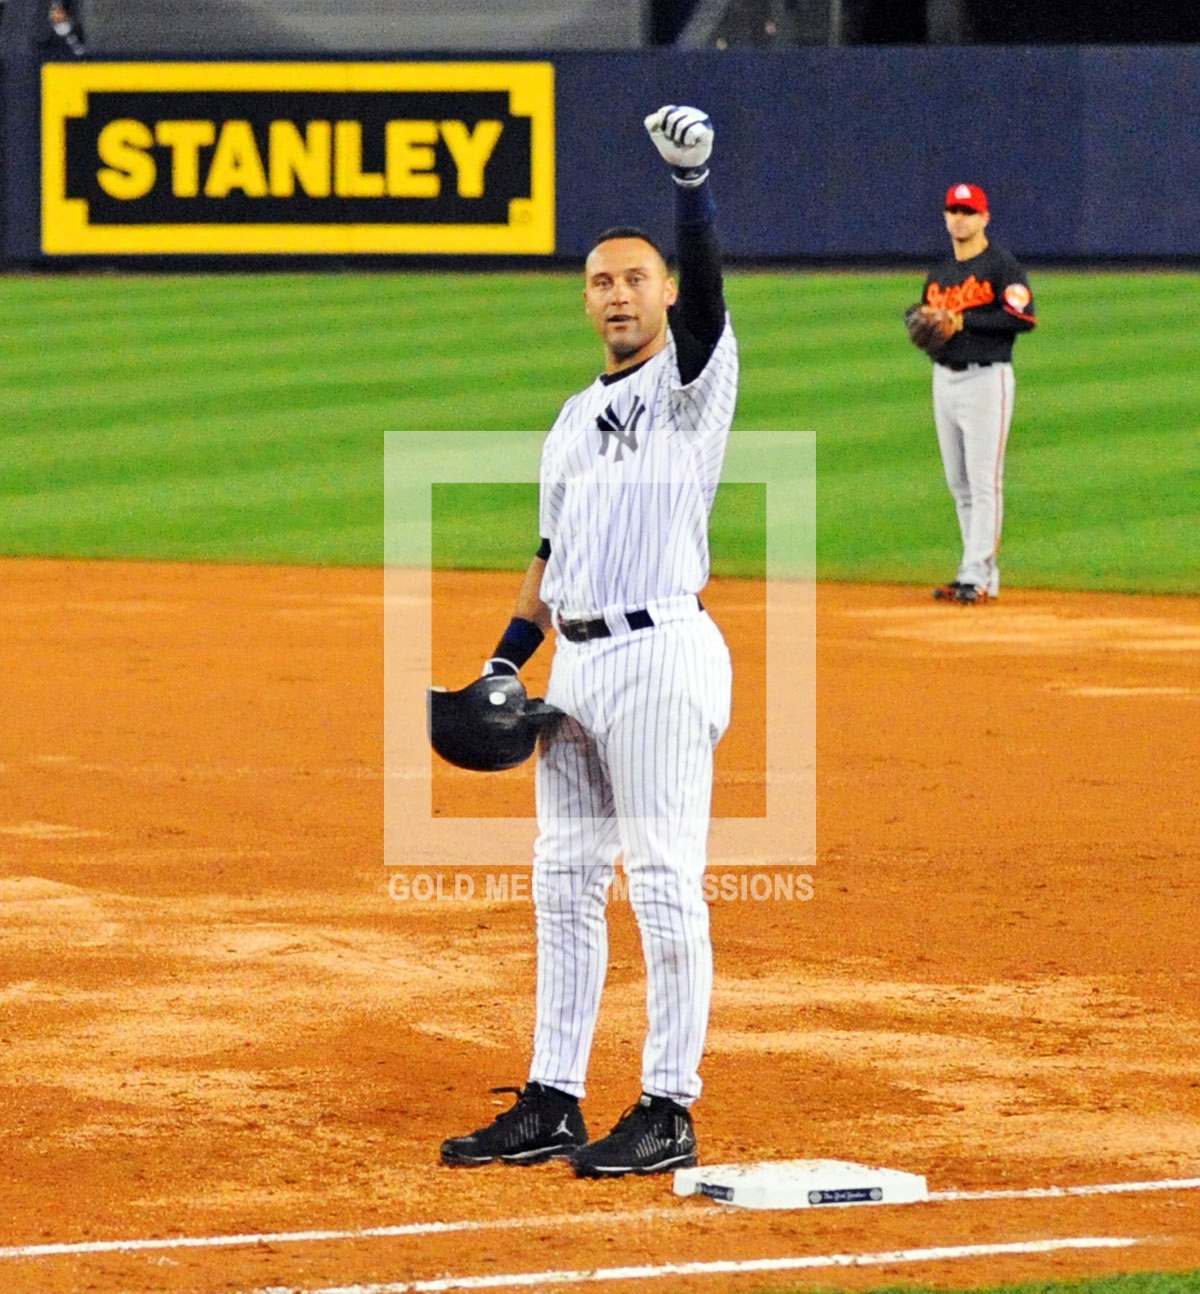 Derek Jeter waves to the crowd after breaking Lou Gehrig's franchise hit record in the third inning against the Baltimore Orioles. Derek singled over first base for his 2722nd hit.(AP Photo/Dick Druckman)